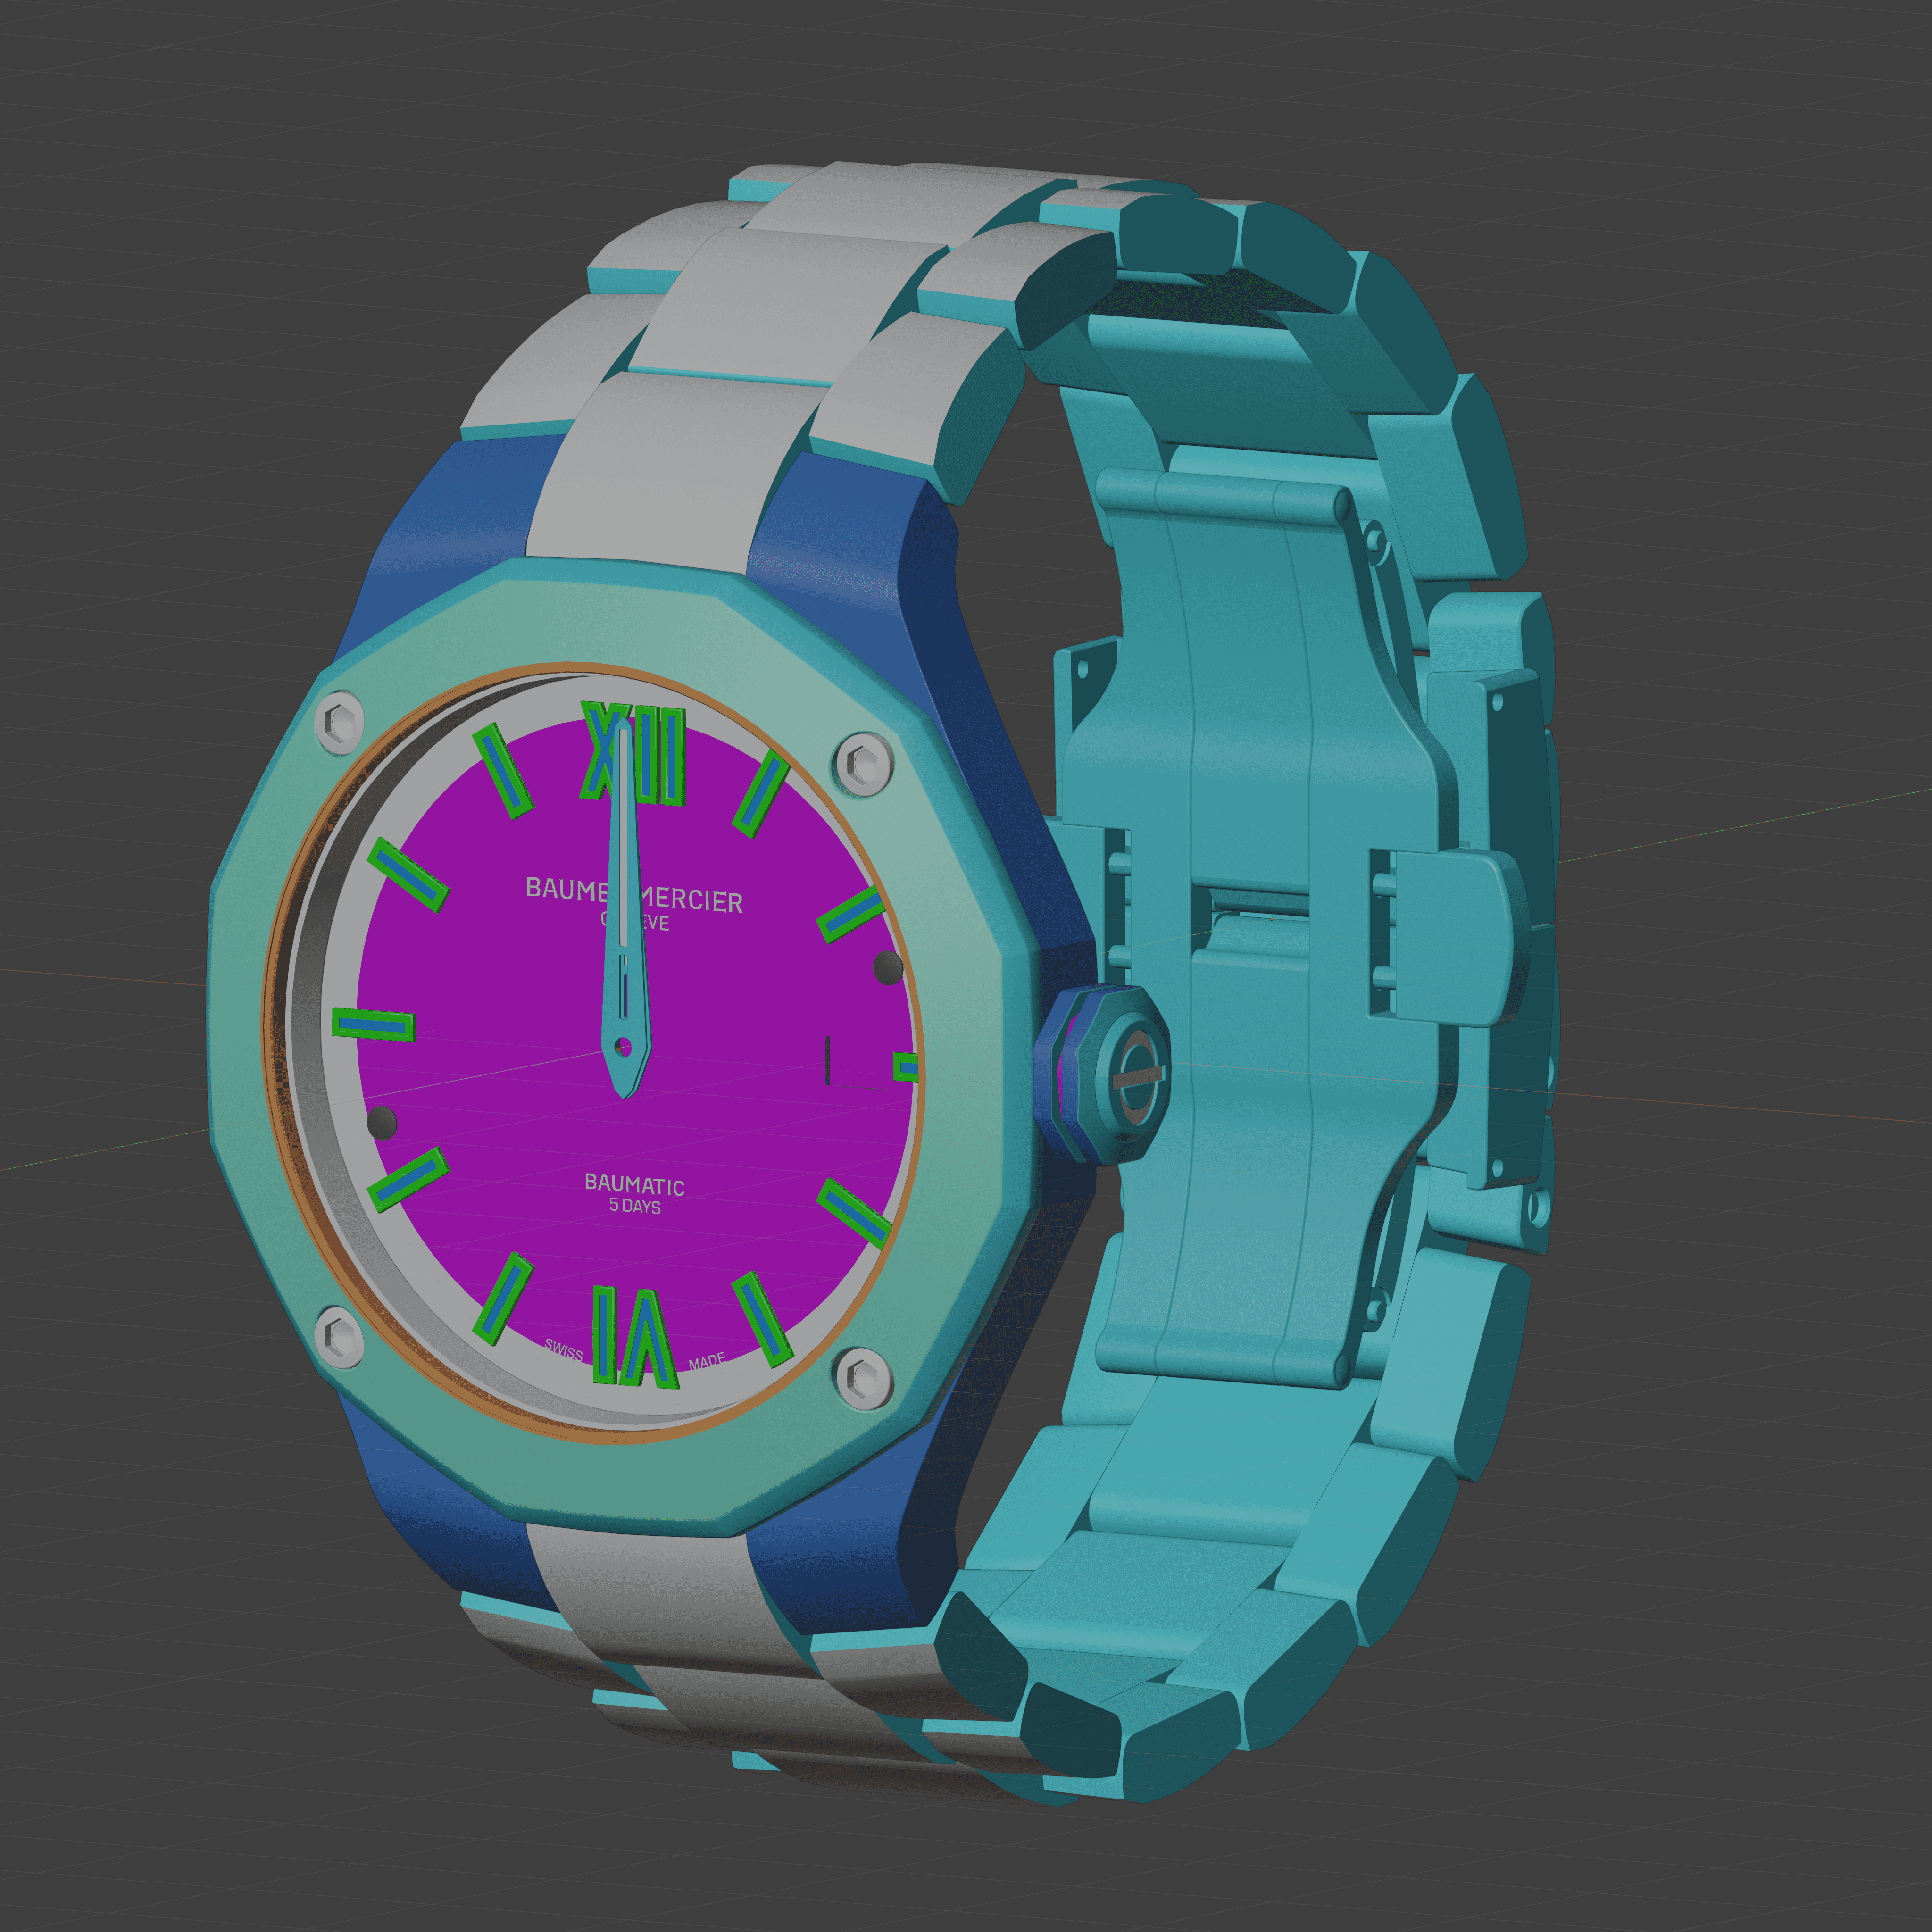 Riviera watch during modeling stage